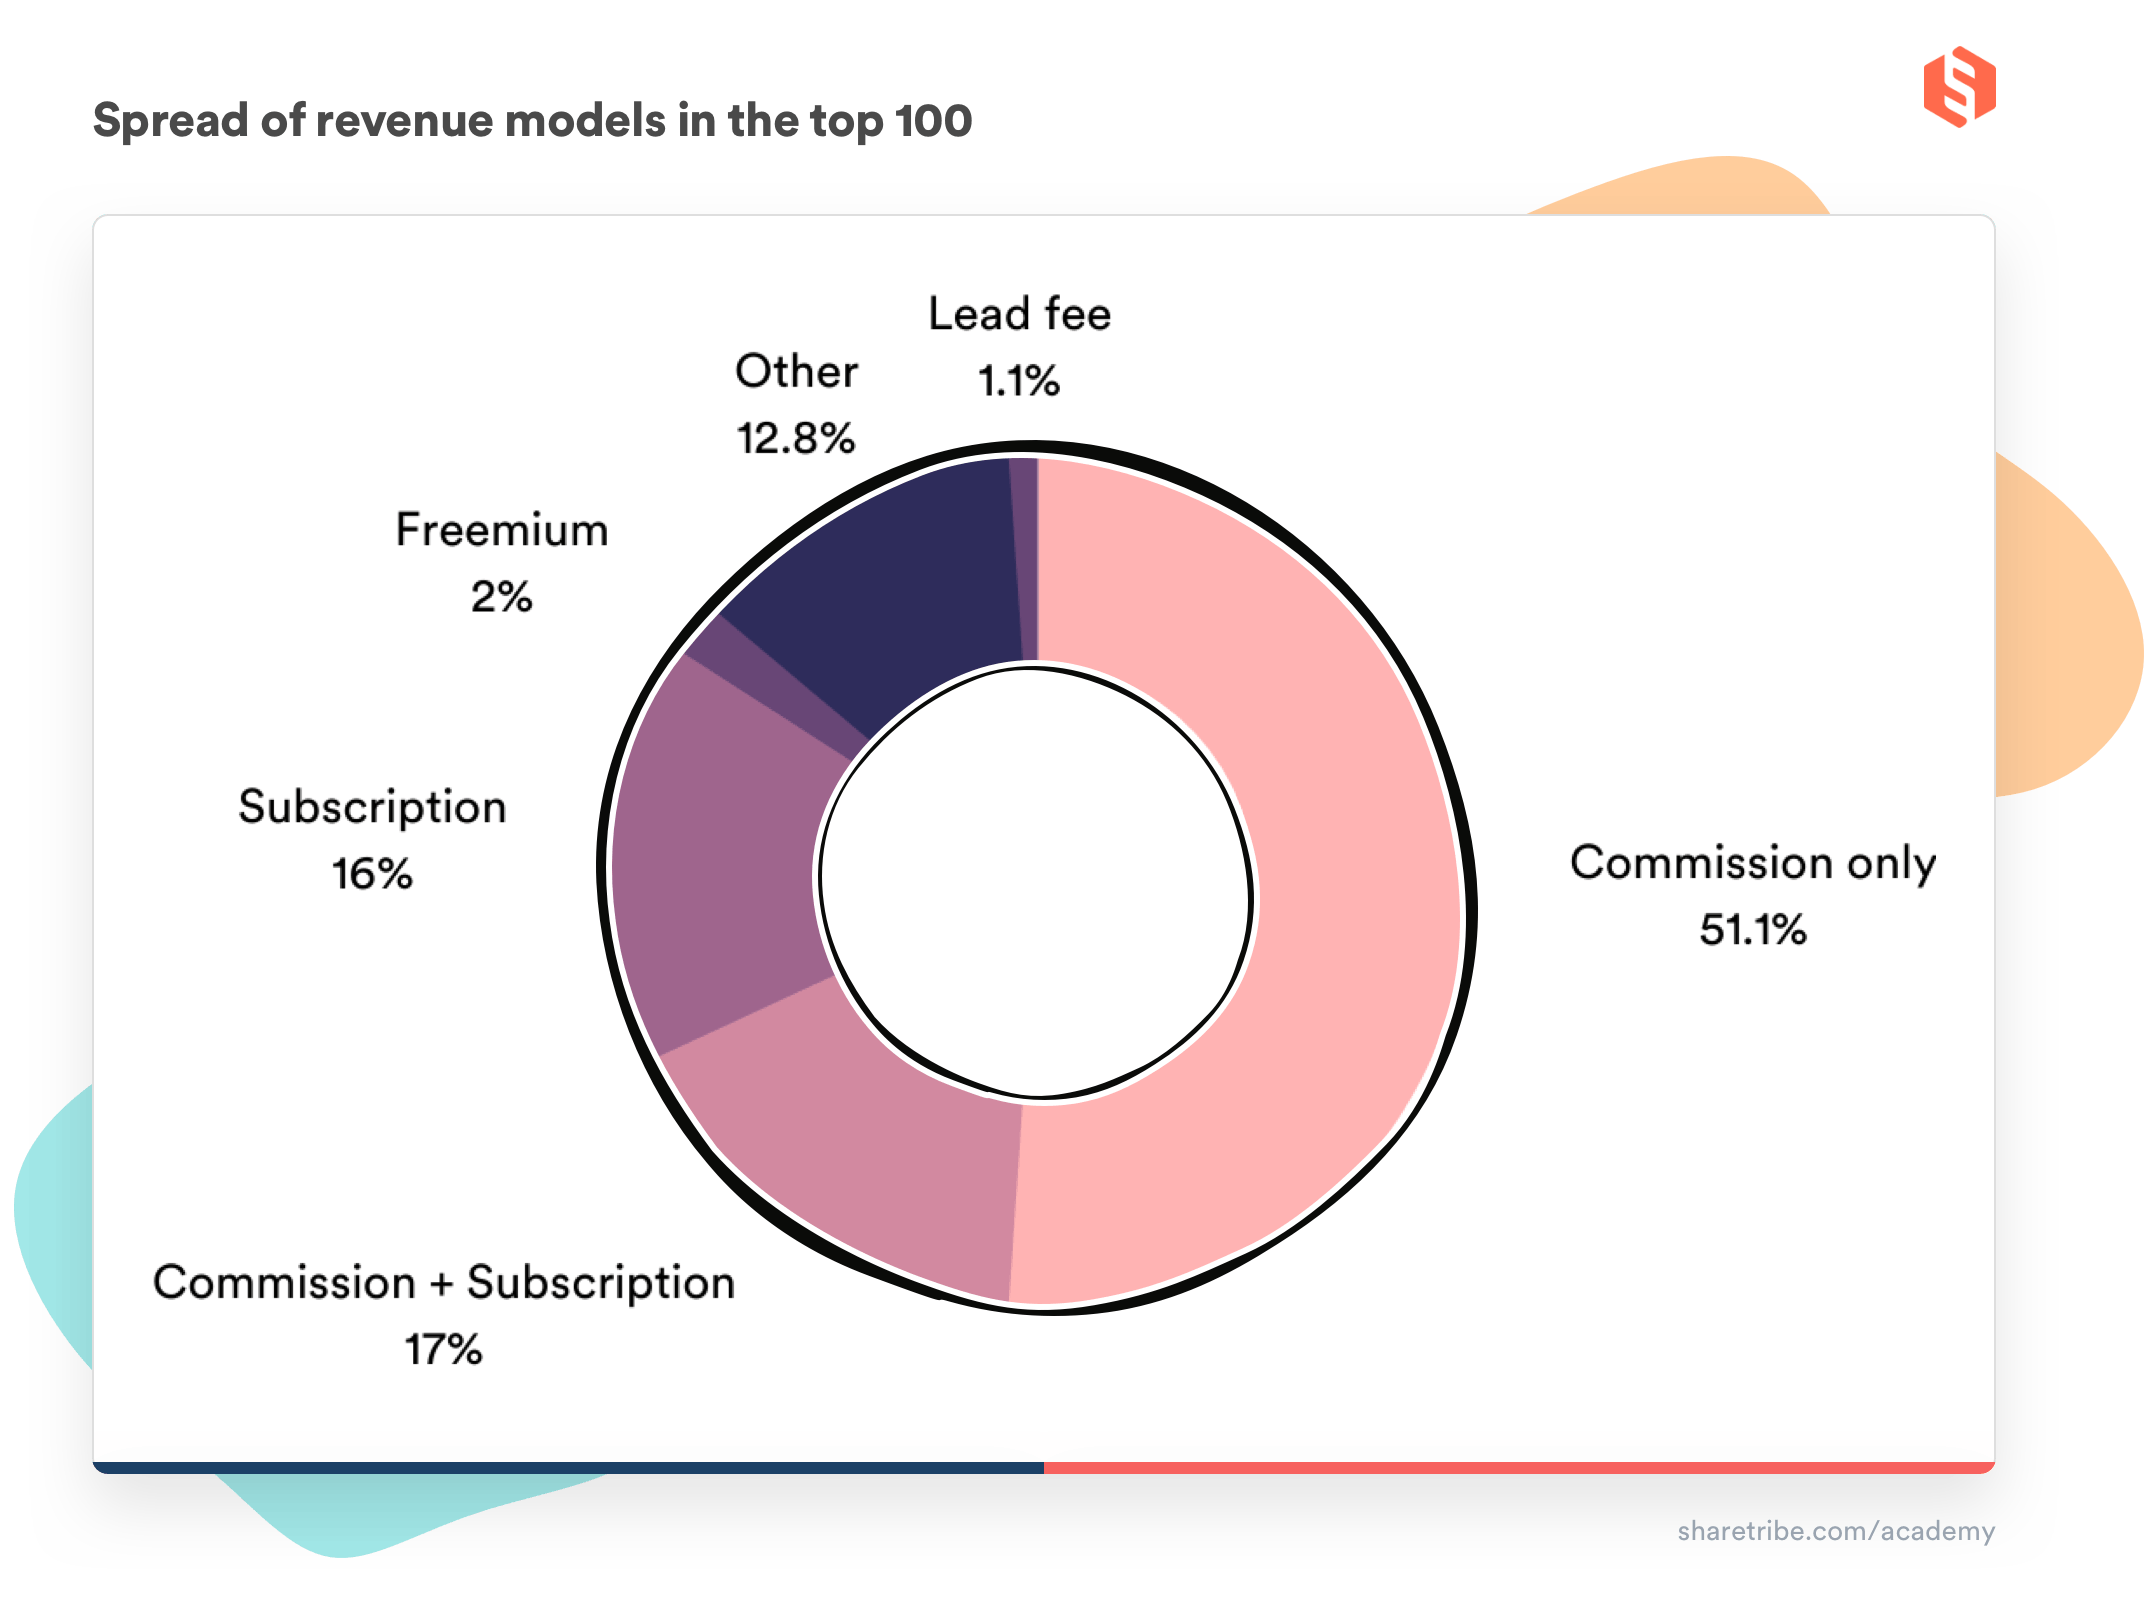 A pie chart illustrating the use of different business models among top marketplaces. 51.1% use commission only, 17% use commission + subscription, 16% use subscription, 2% use freemium, 1.1% use lead fees, and 12.8% use other business models.